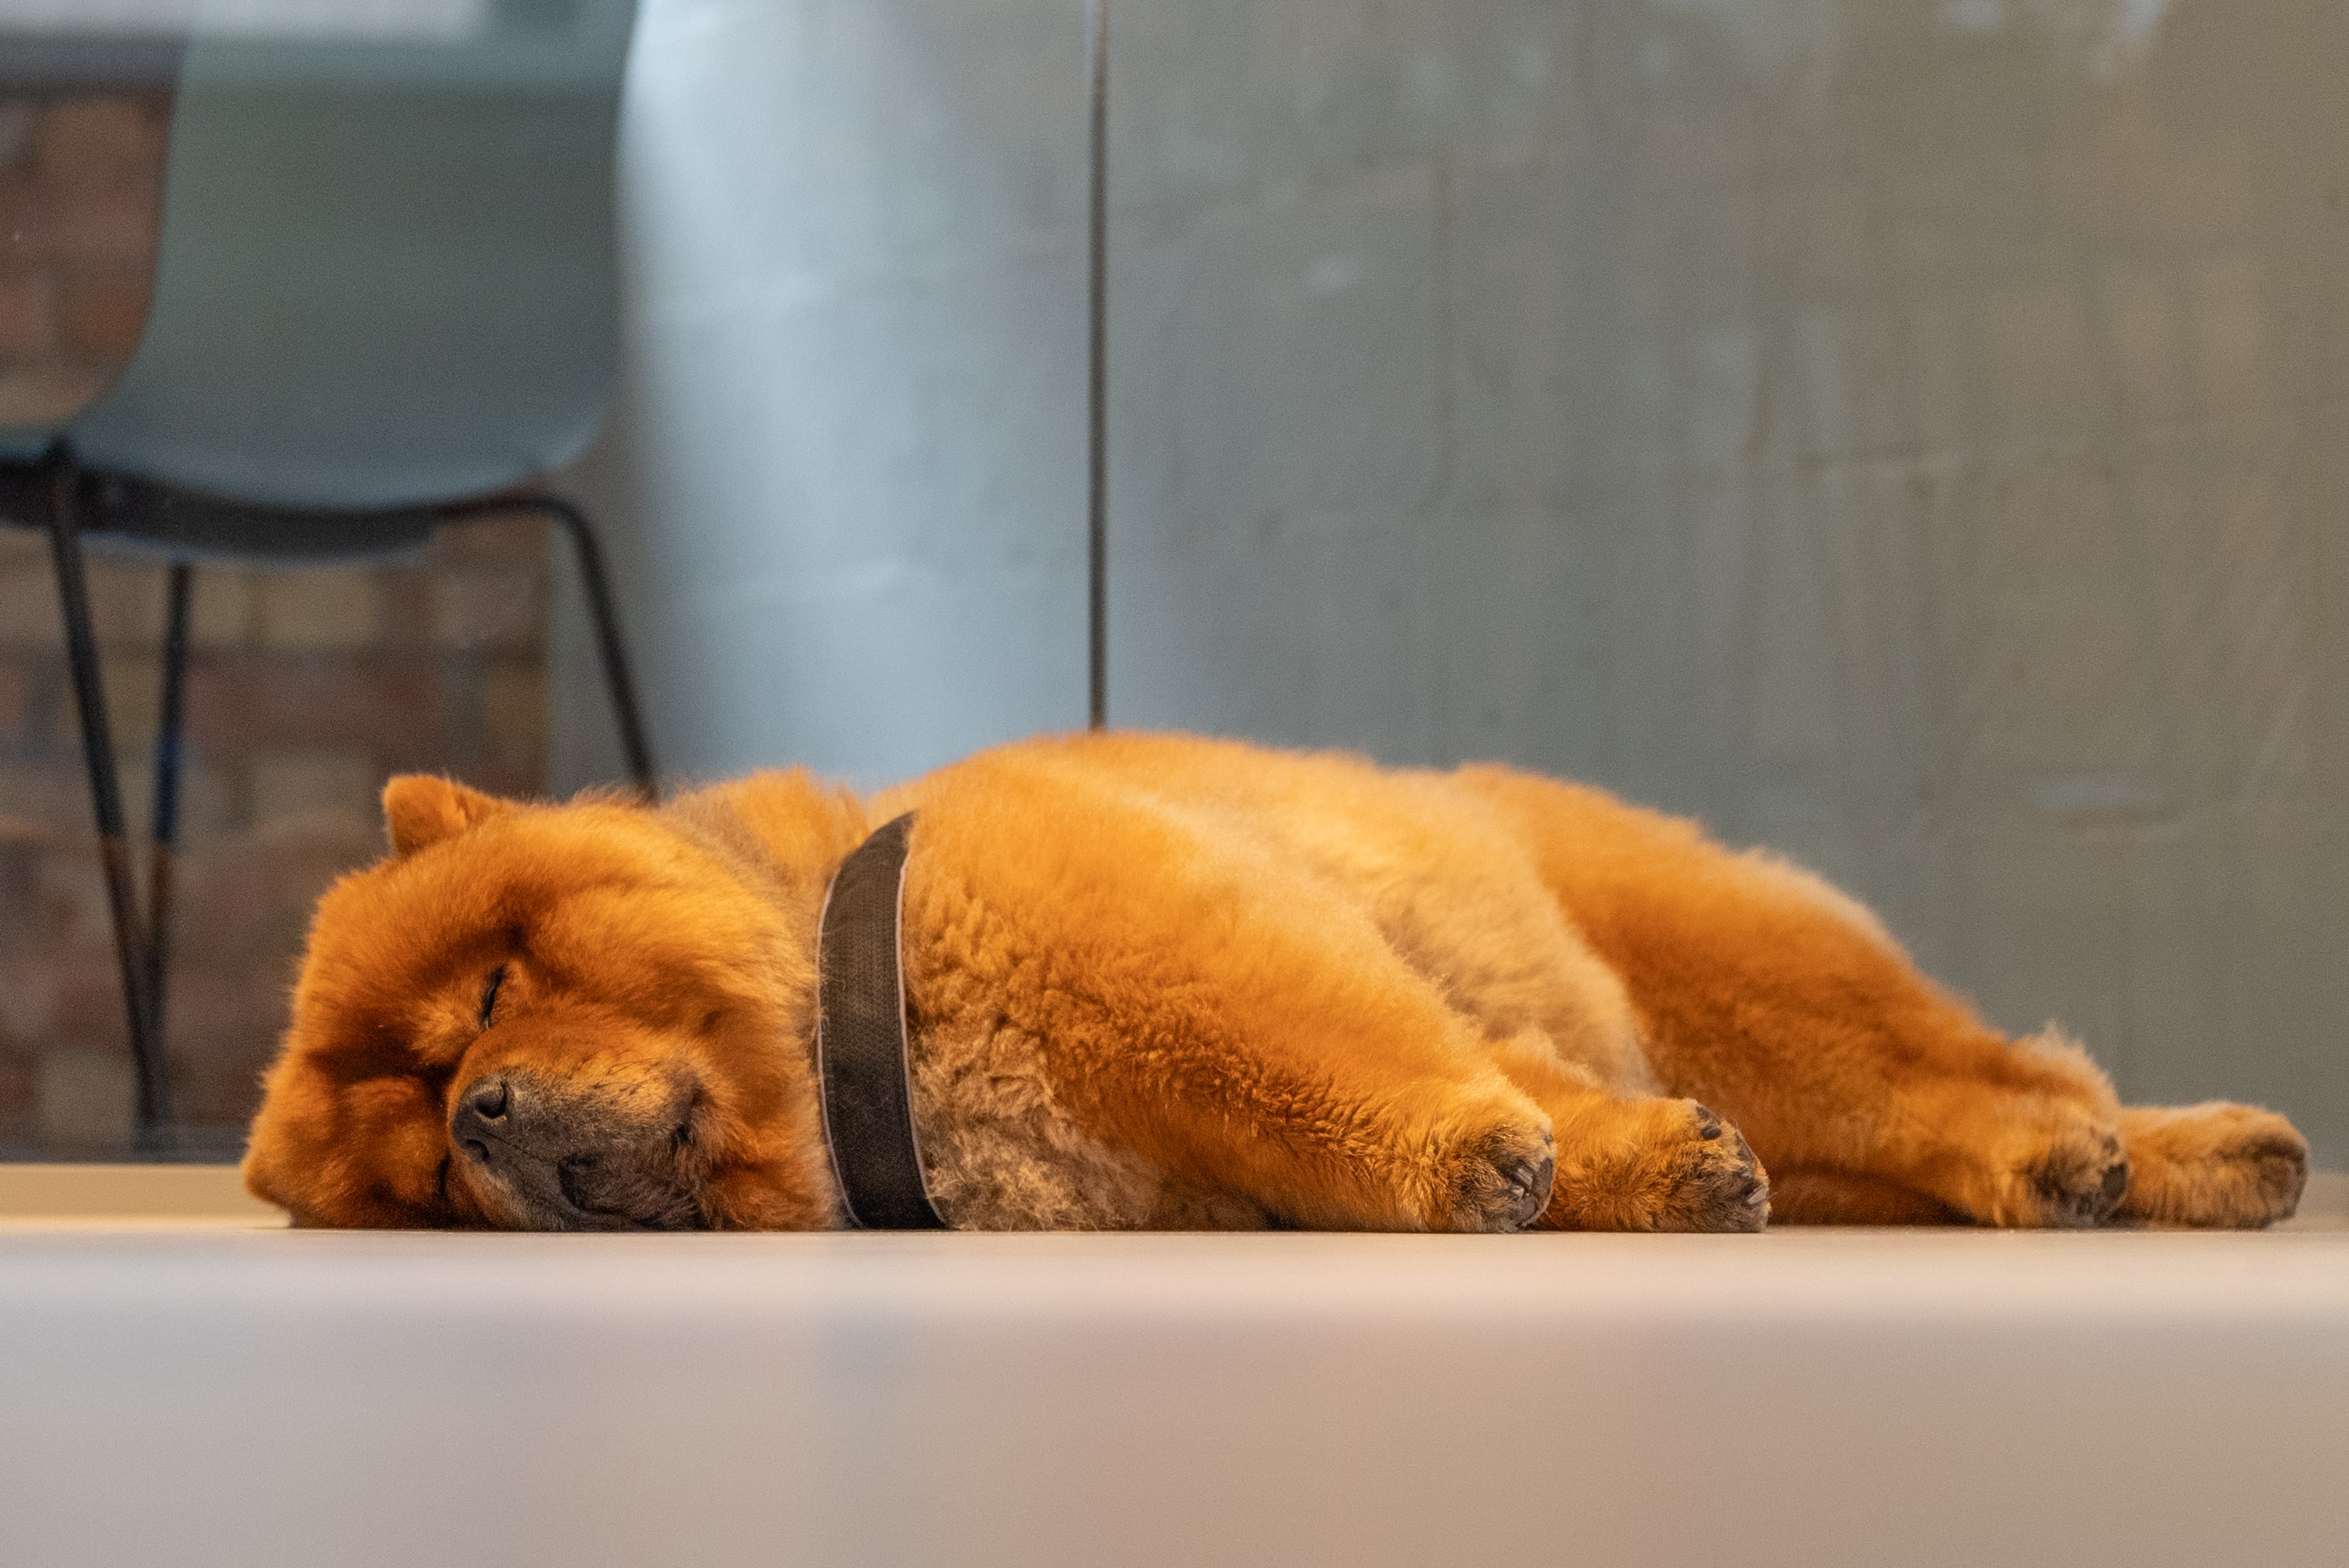 One of our office dogs, Barney, a red Chow Chow, sleeping on our office floor.